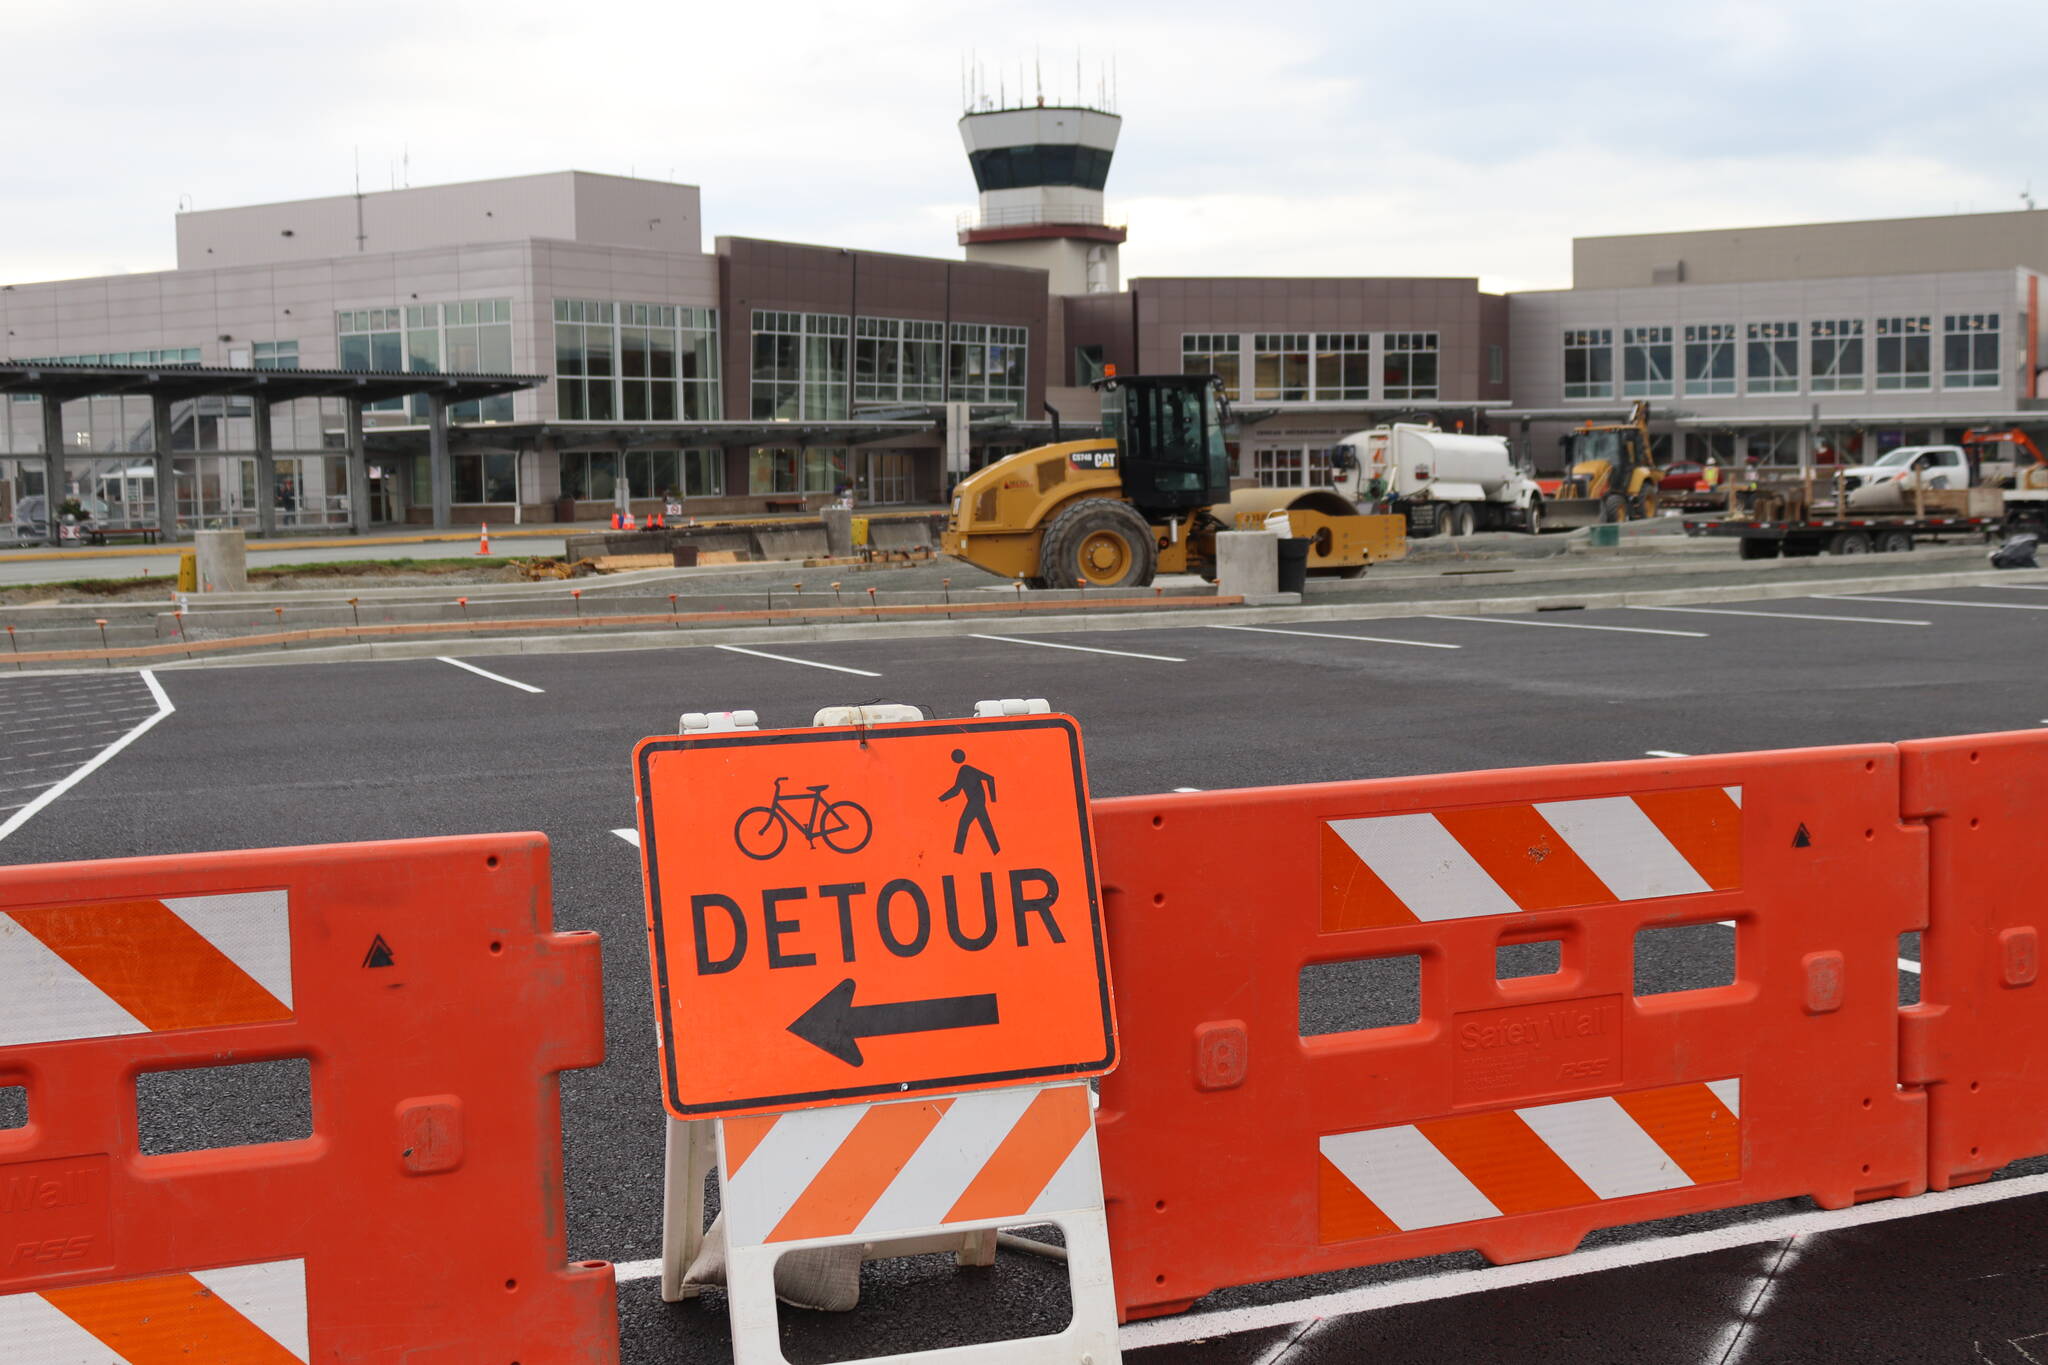 A $10 million project to improve drainage and resurface parking lots at Juneau International Airport is slated for completion Nov. 1. (Meredith Jordan/ Juneau Empire)